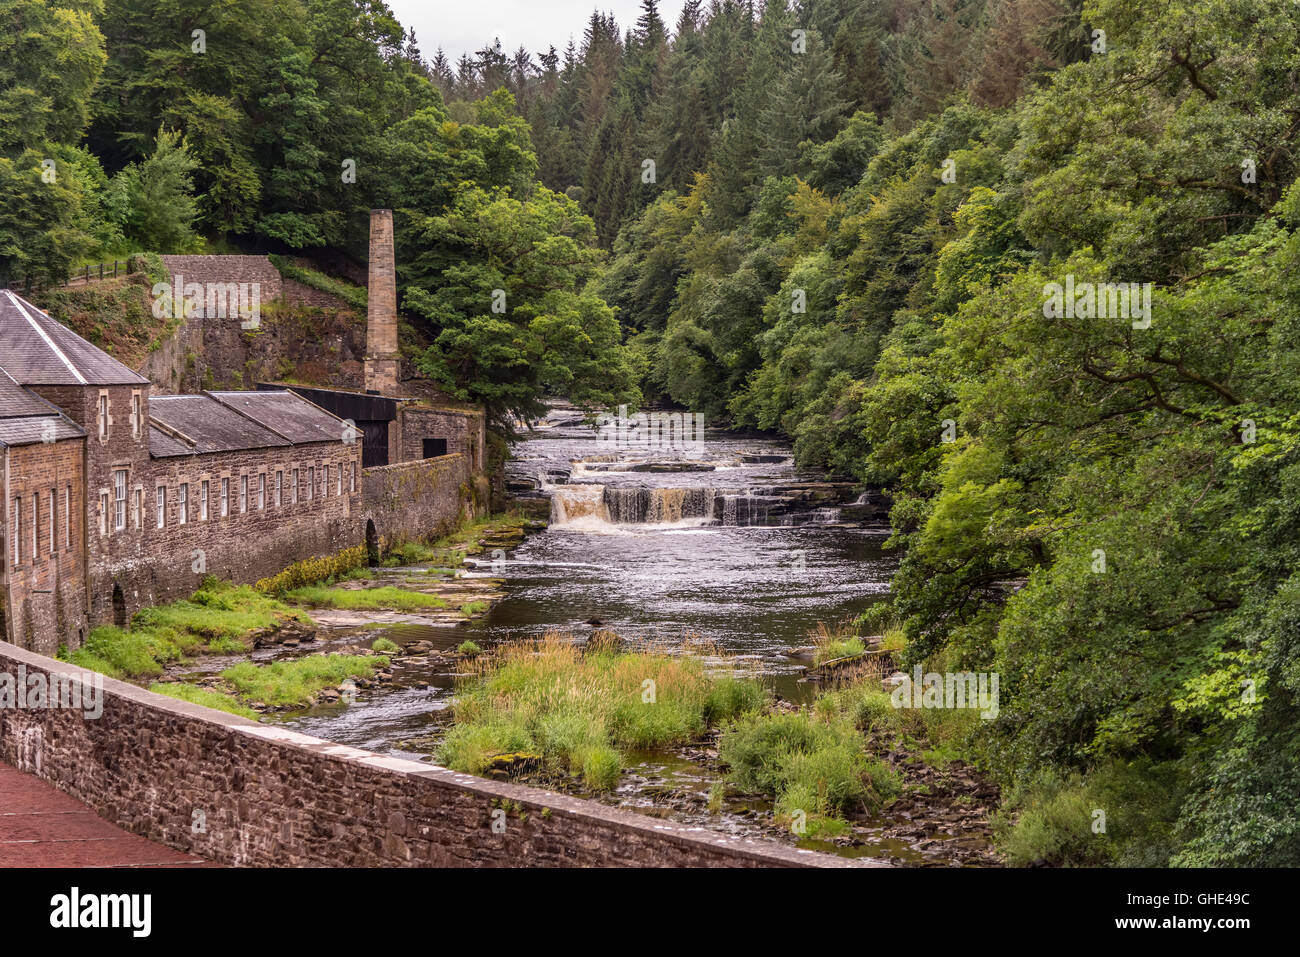 New Lanark is a village on the River Clyde, near Lanark, Lanarkshire, It was founded in 1786 by David Dale. The Falls of Clyde. Stock Photo